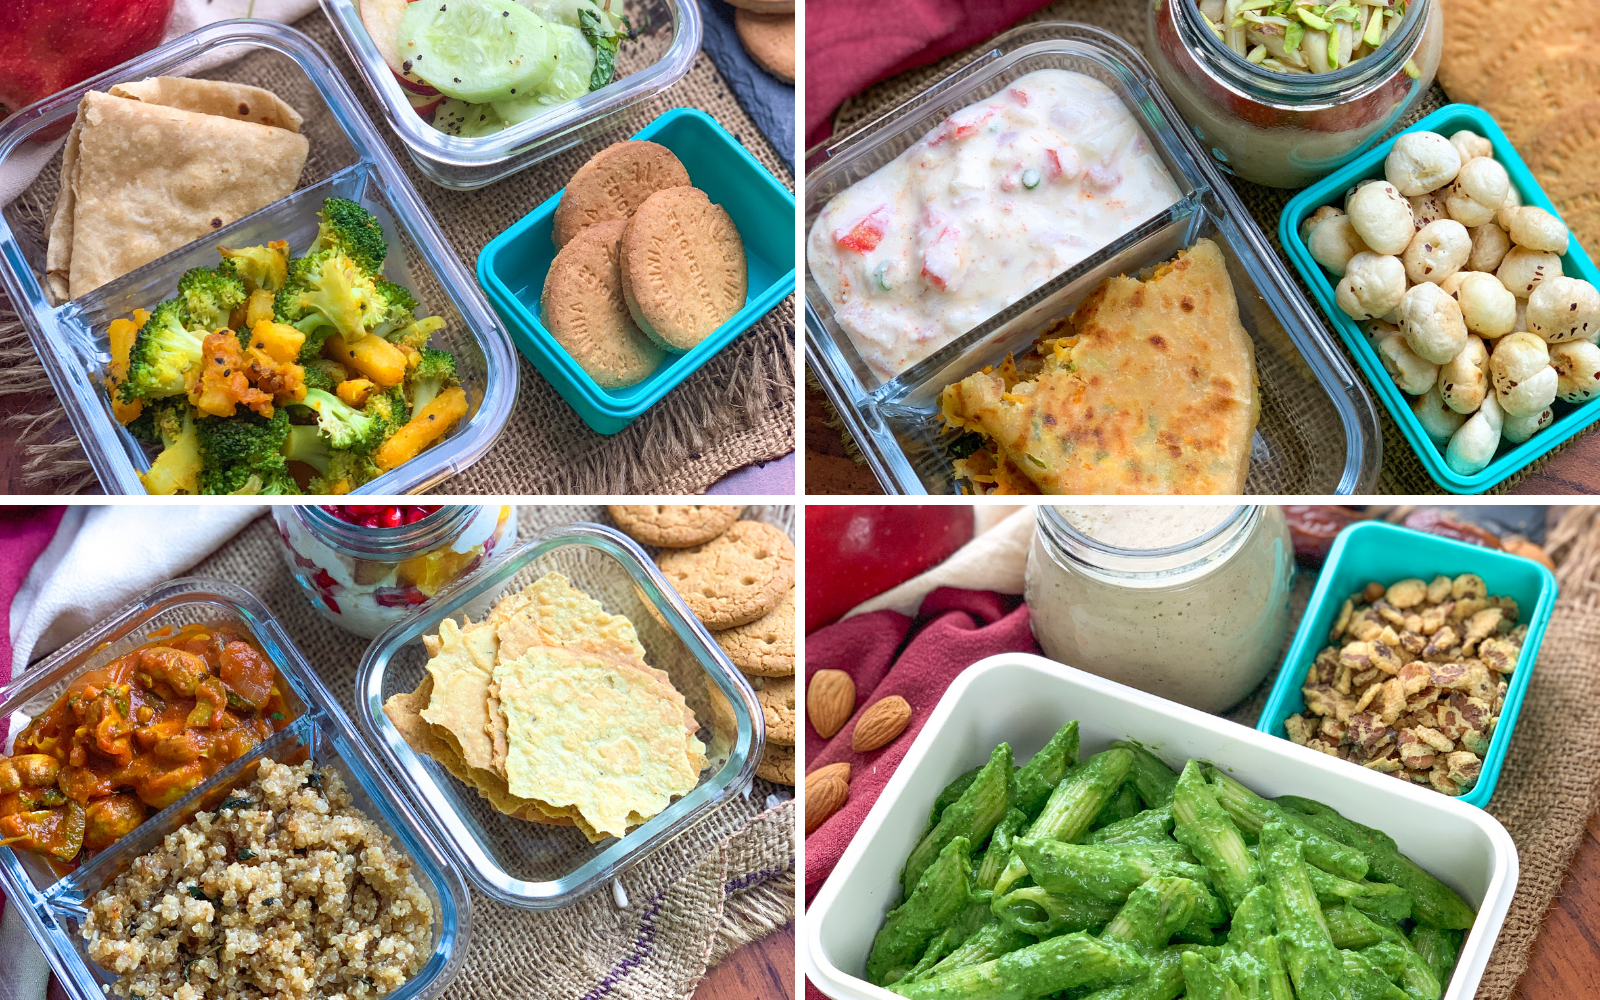 12 Office Lunch Box Videos With Healthy Office Snacks & Lunch by Archana's  Kitchen